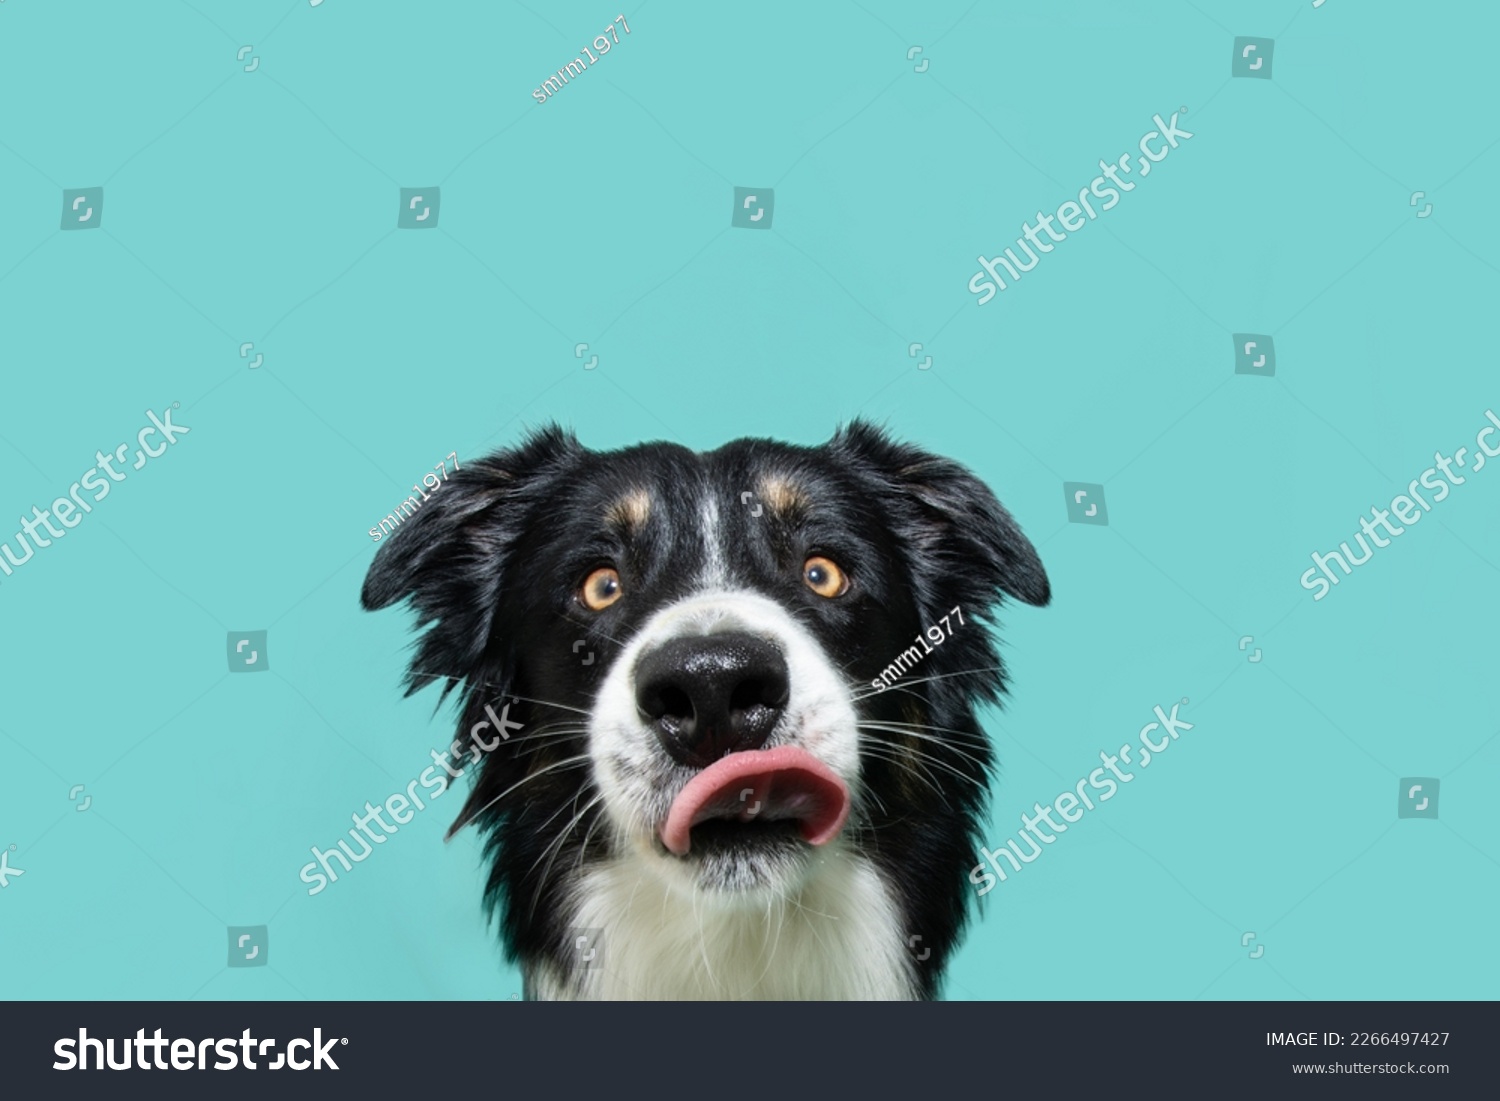 Hungry border collie dog licking its lips with tongue. Isolated on blue background #2266497427